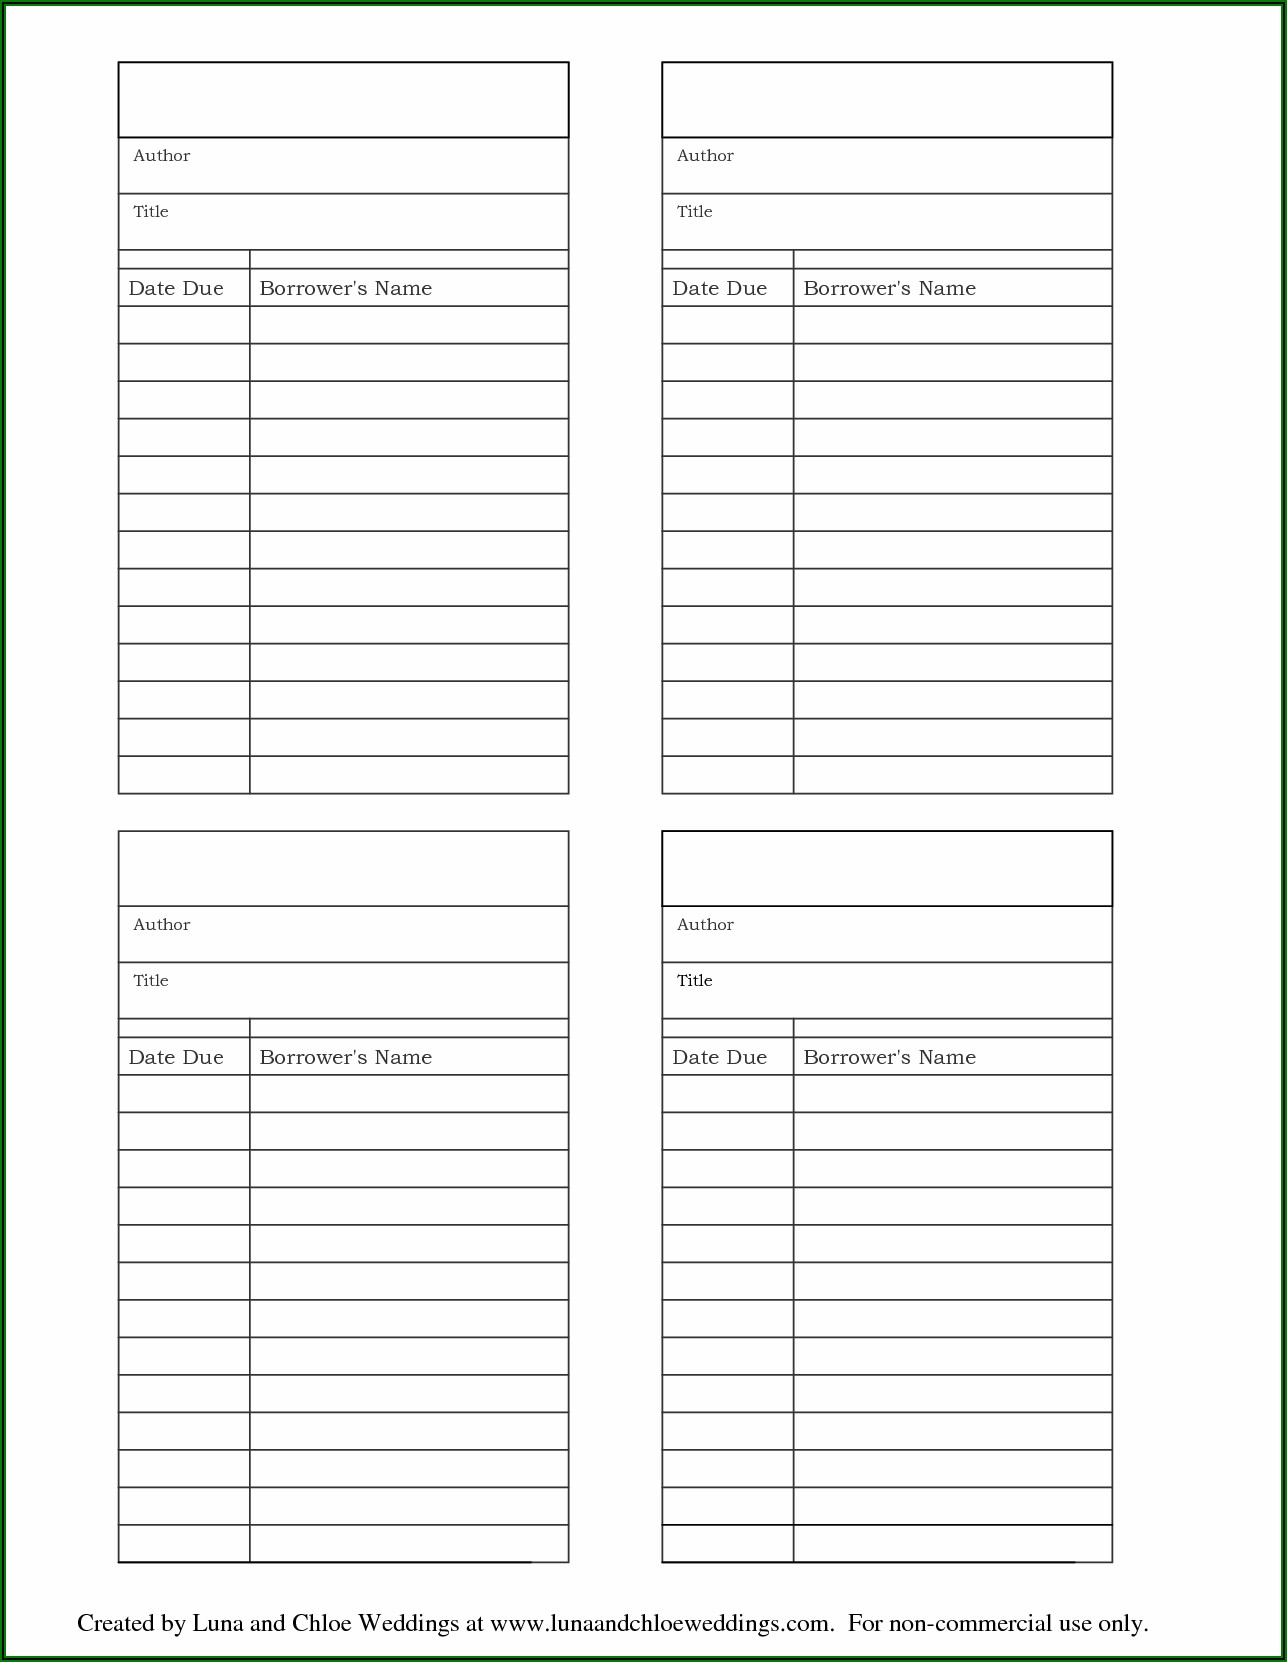 Library Book Issue Card Format